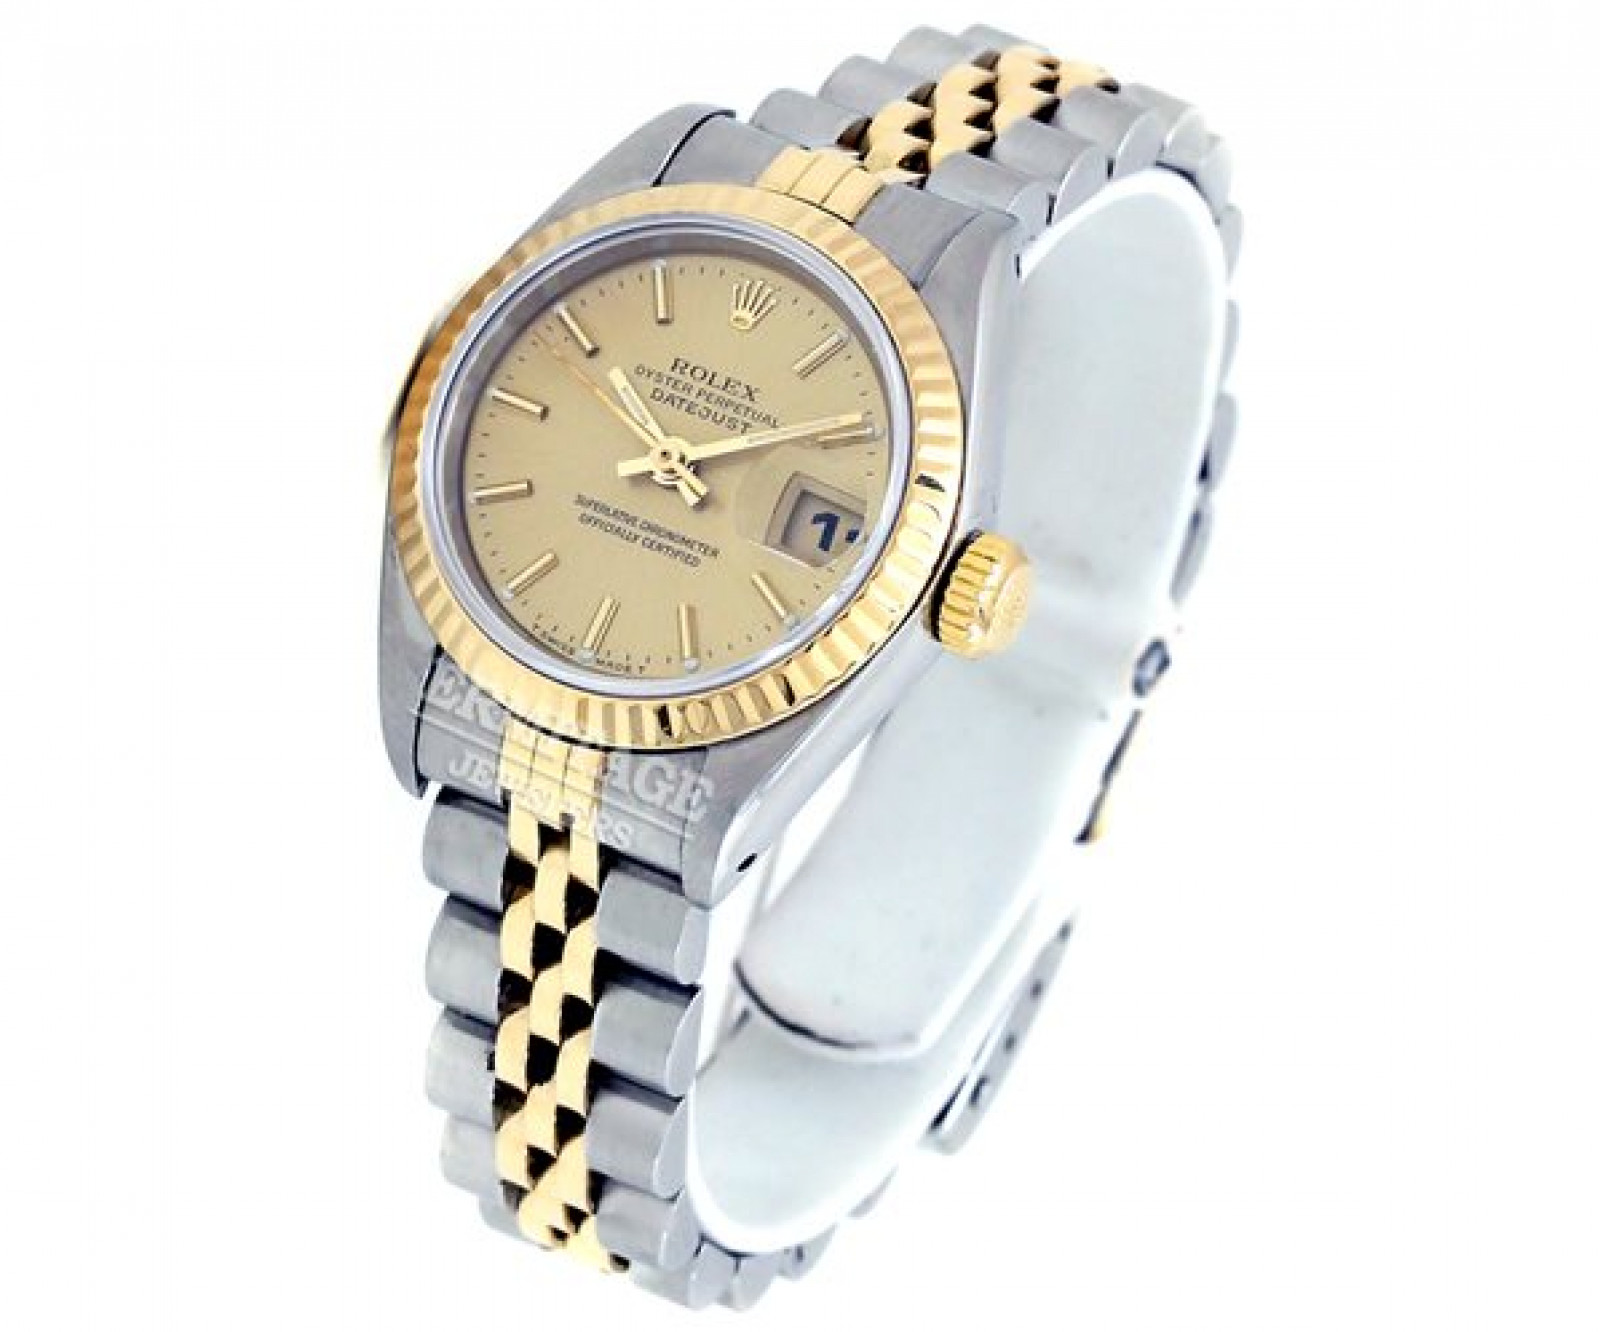 Pre-Owned Gold & Steel Rolex Datejust 69173 Year 1990